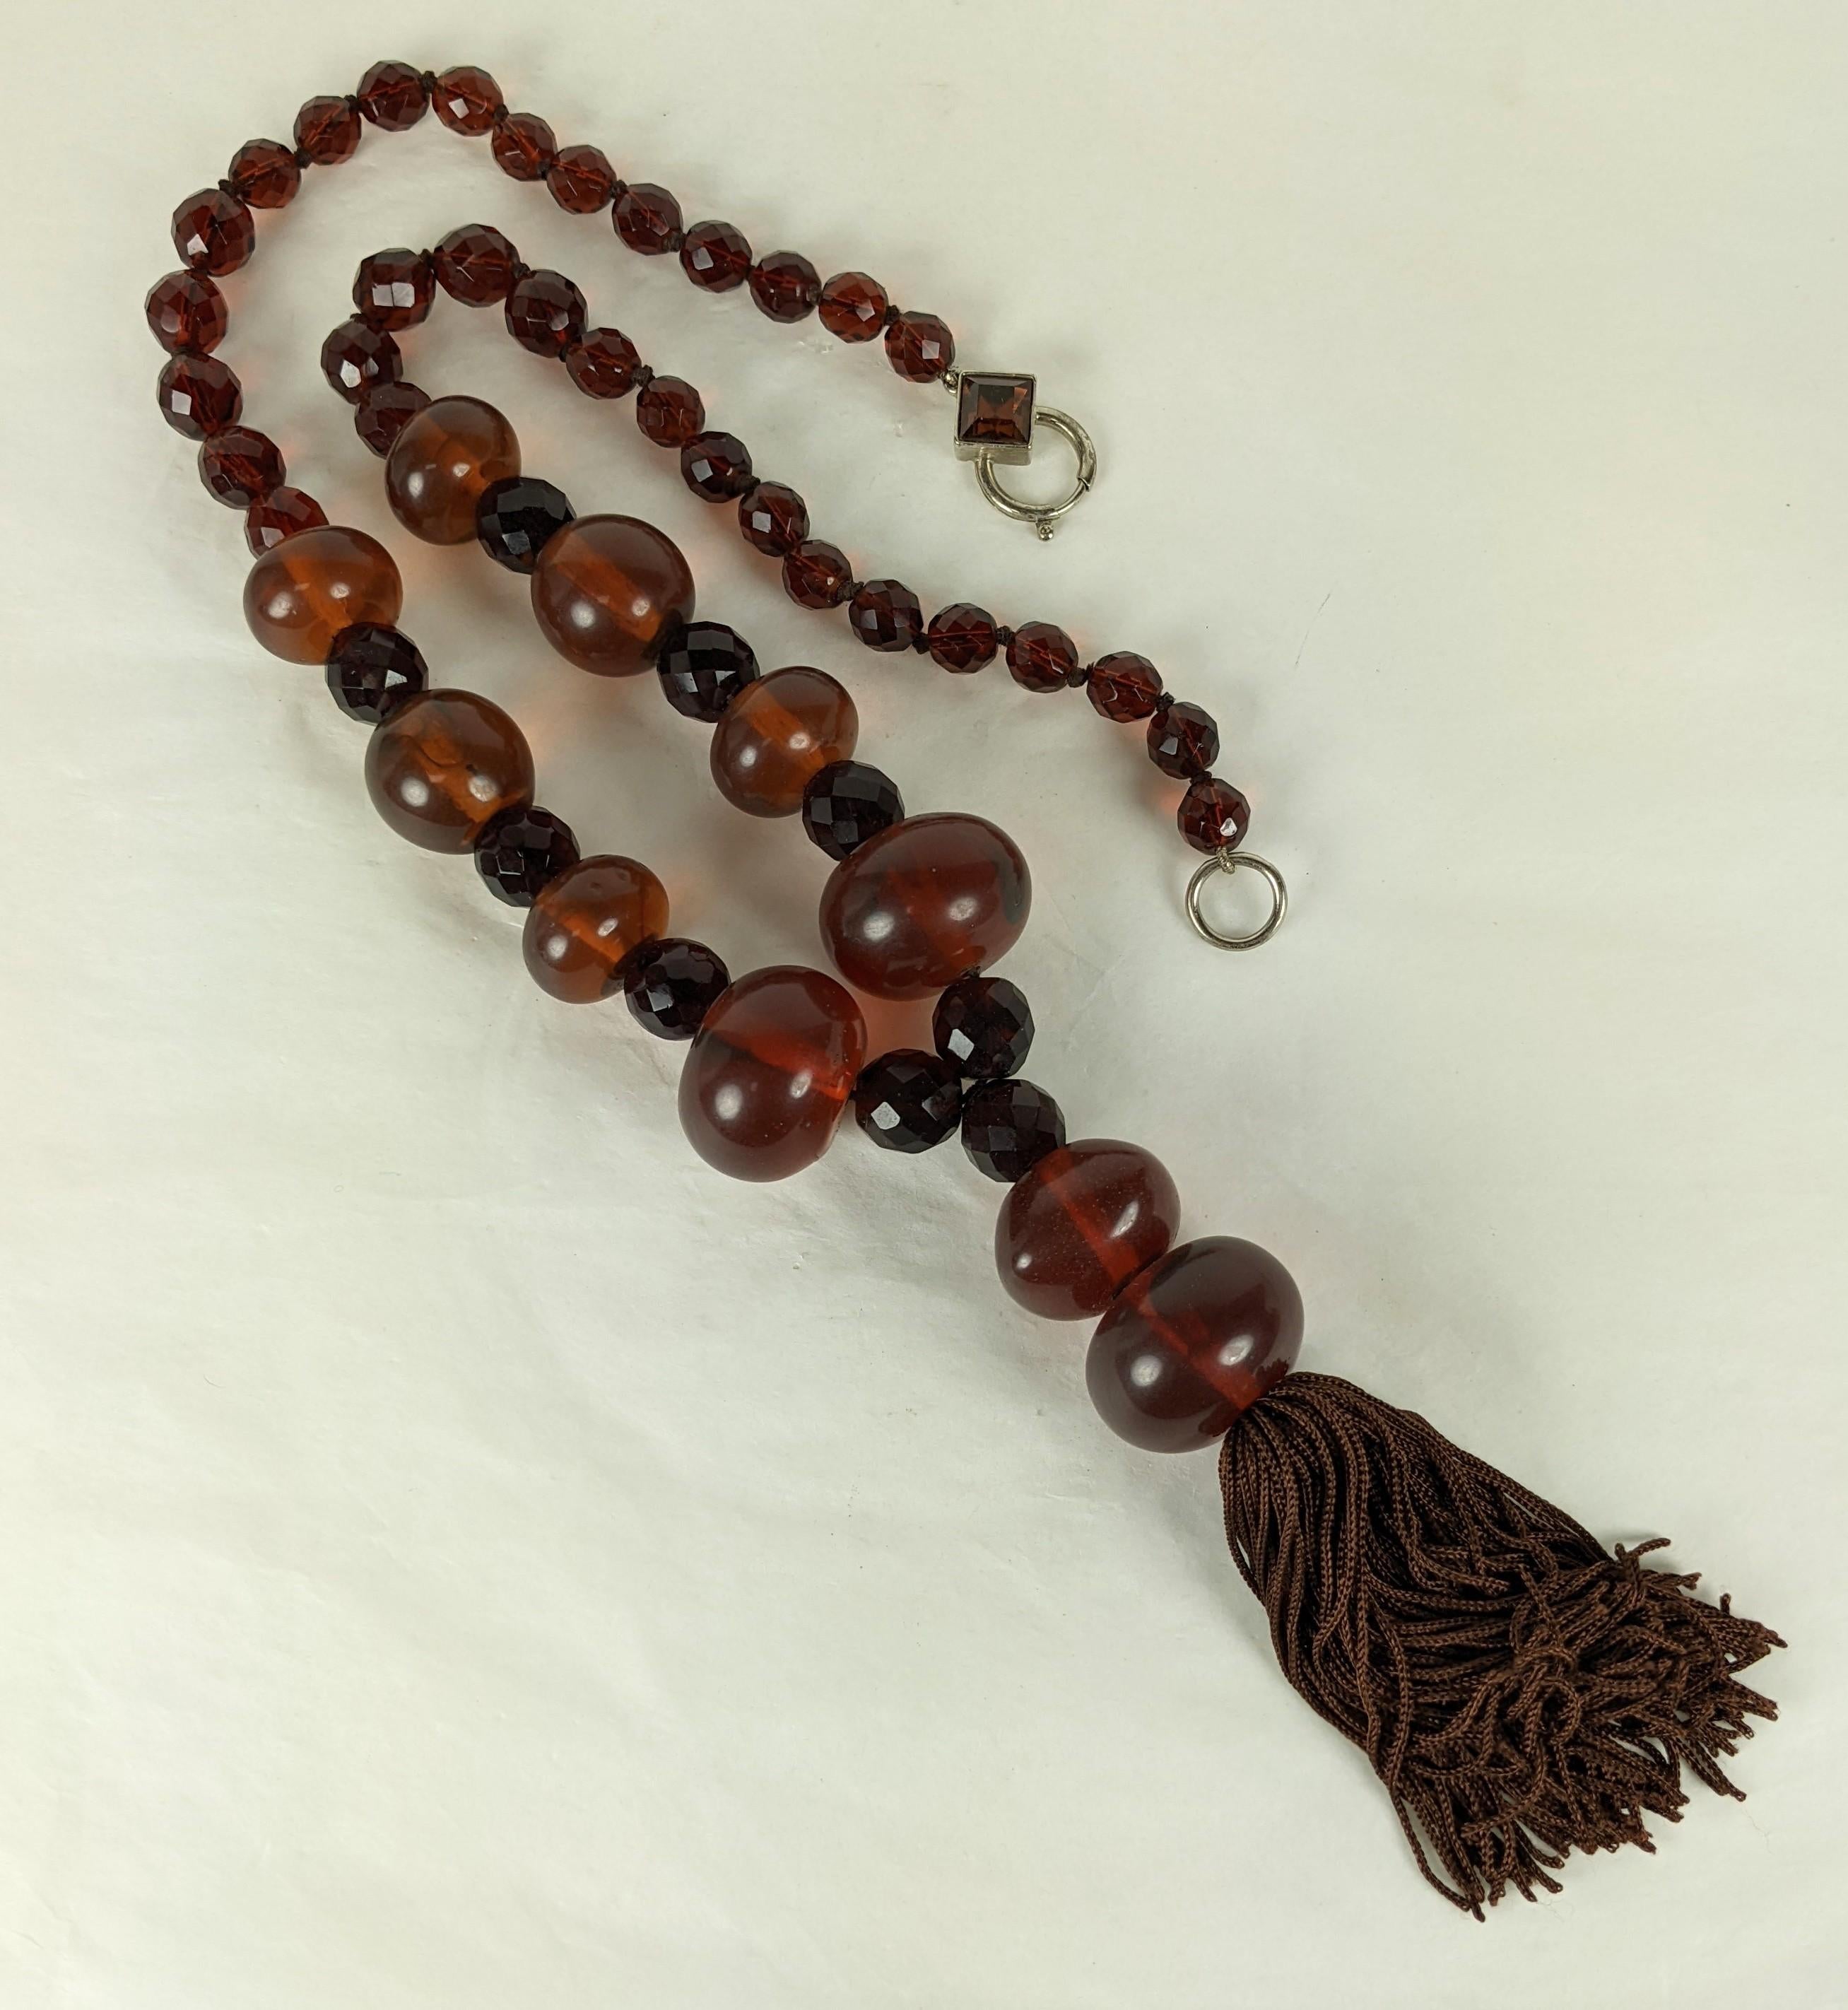 Striking Italian Faux Amber Tassel Bead Necklace from the 1980's. Italy is known for its amazing resin and bakelite jewelry. There are different sized beads with faceted bead spacers which are hand knotted with jewel crystal clasp and large silk